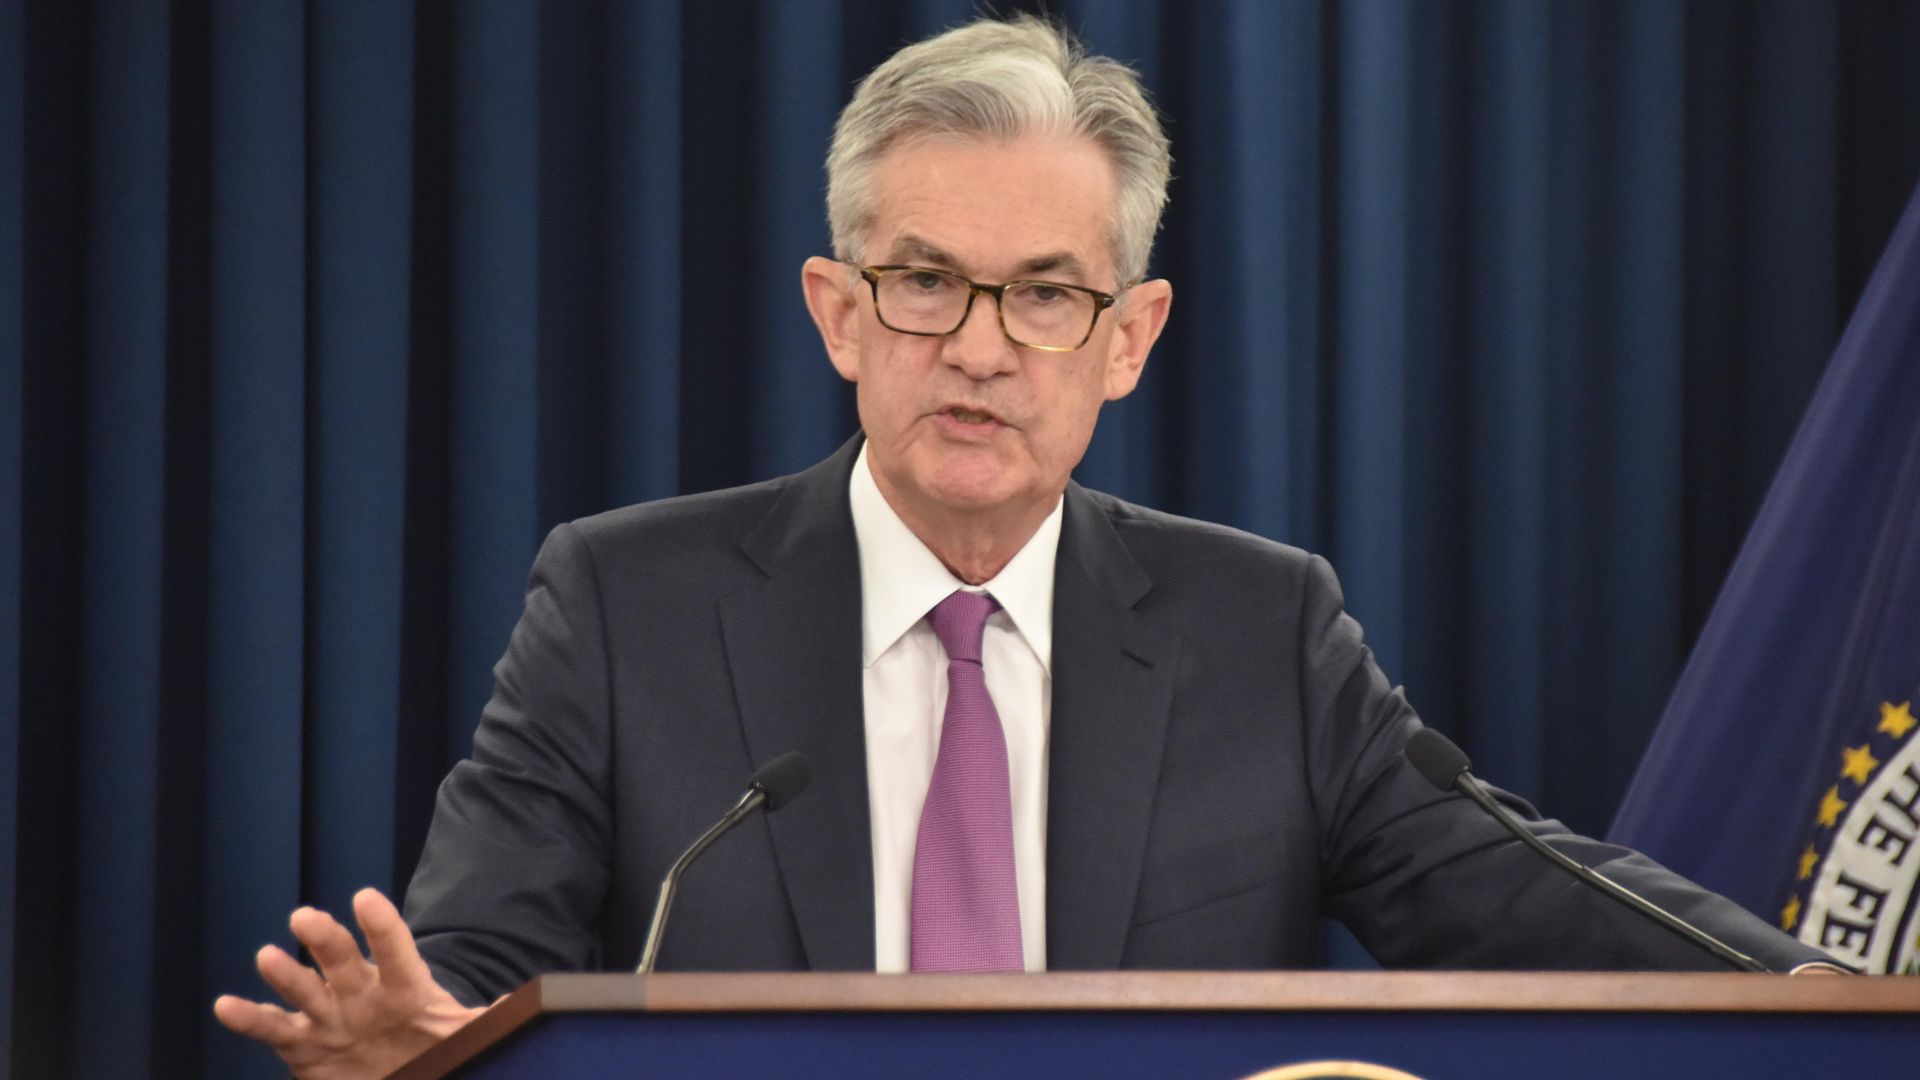 Federal Reserve Board Chairman Jerome Powell speaks during a news conference 